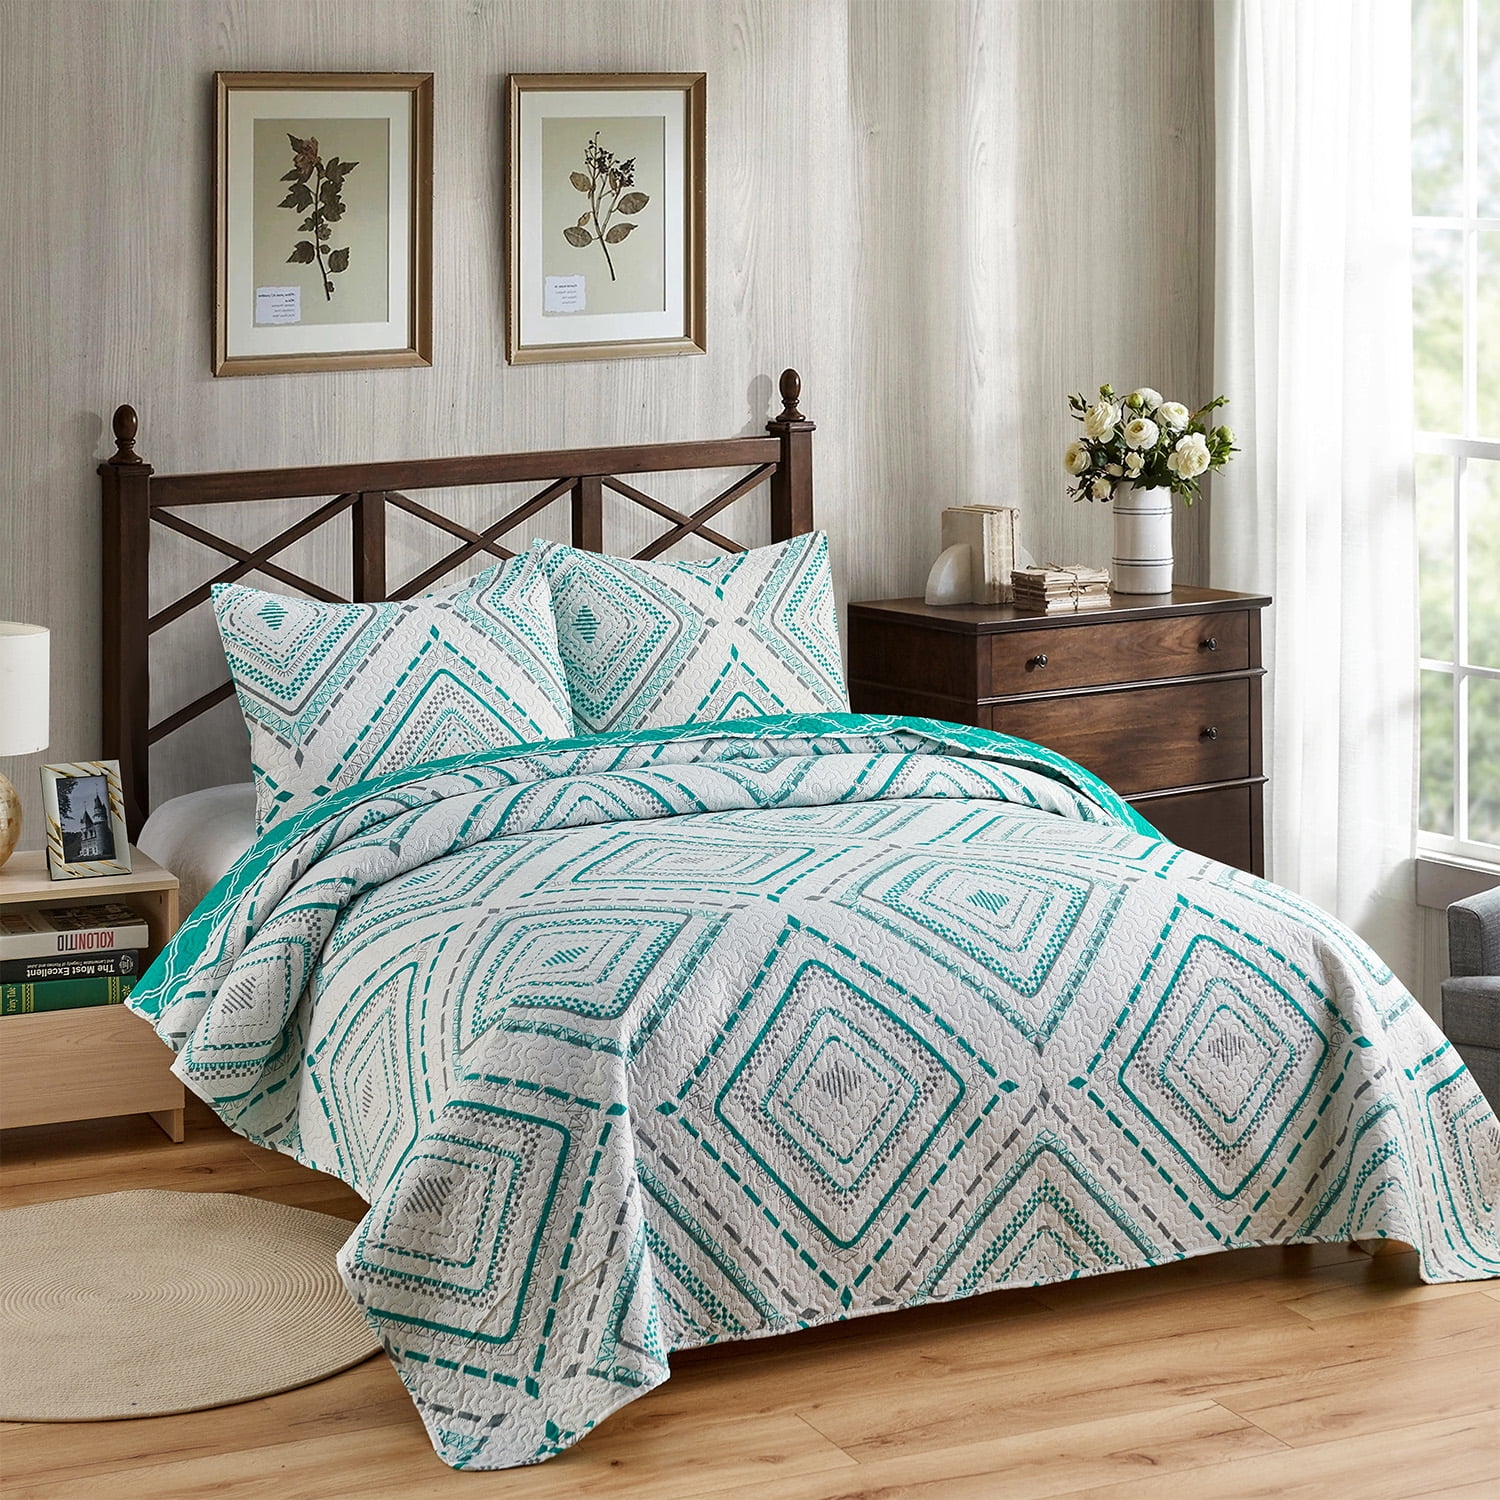 Details about   Linen Plus Quilted Bedspread Set Oversized Coverlet Floral Brown Teal White New 